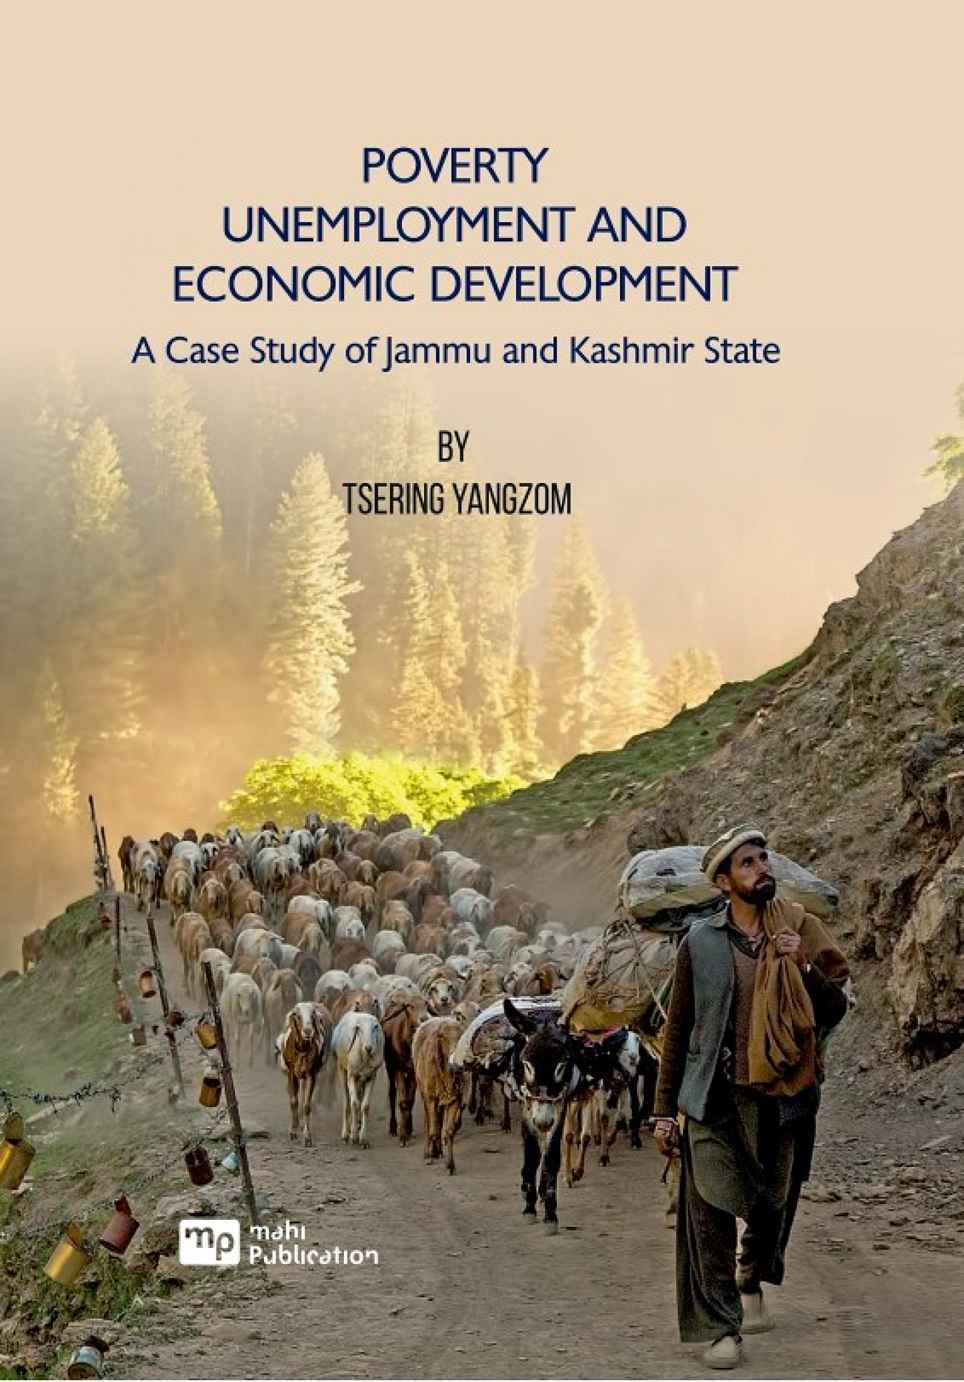 Poverty, Unemployment and Economic Development a Case Study of Jammu and Kashmir State